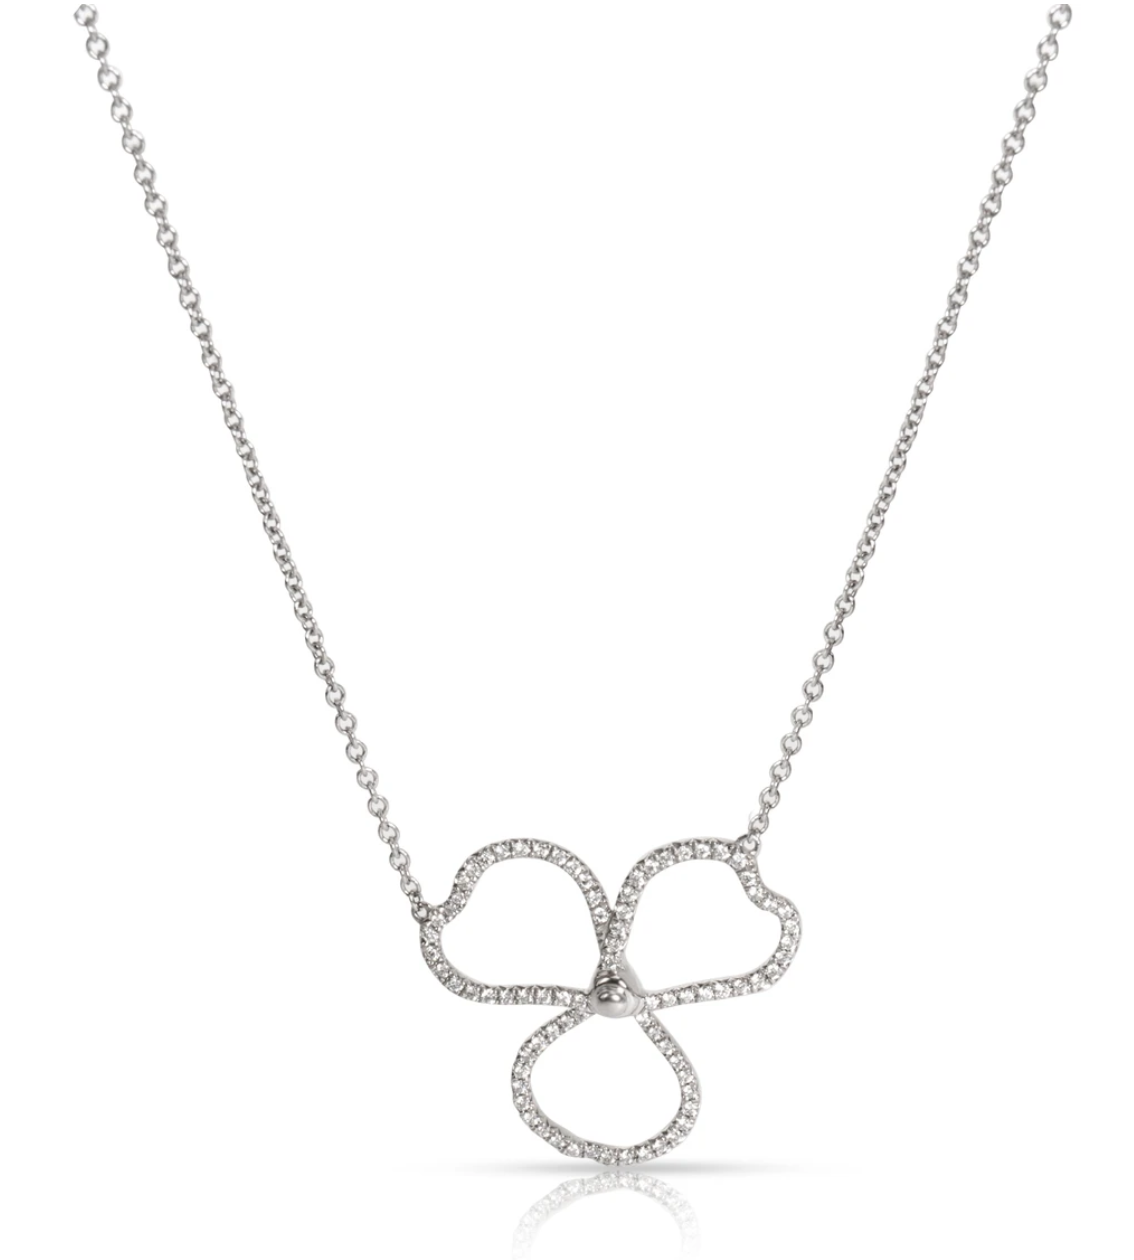 Tiffany & Co. Paper Flowers necklace